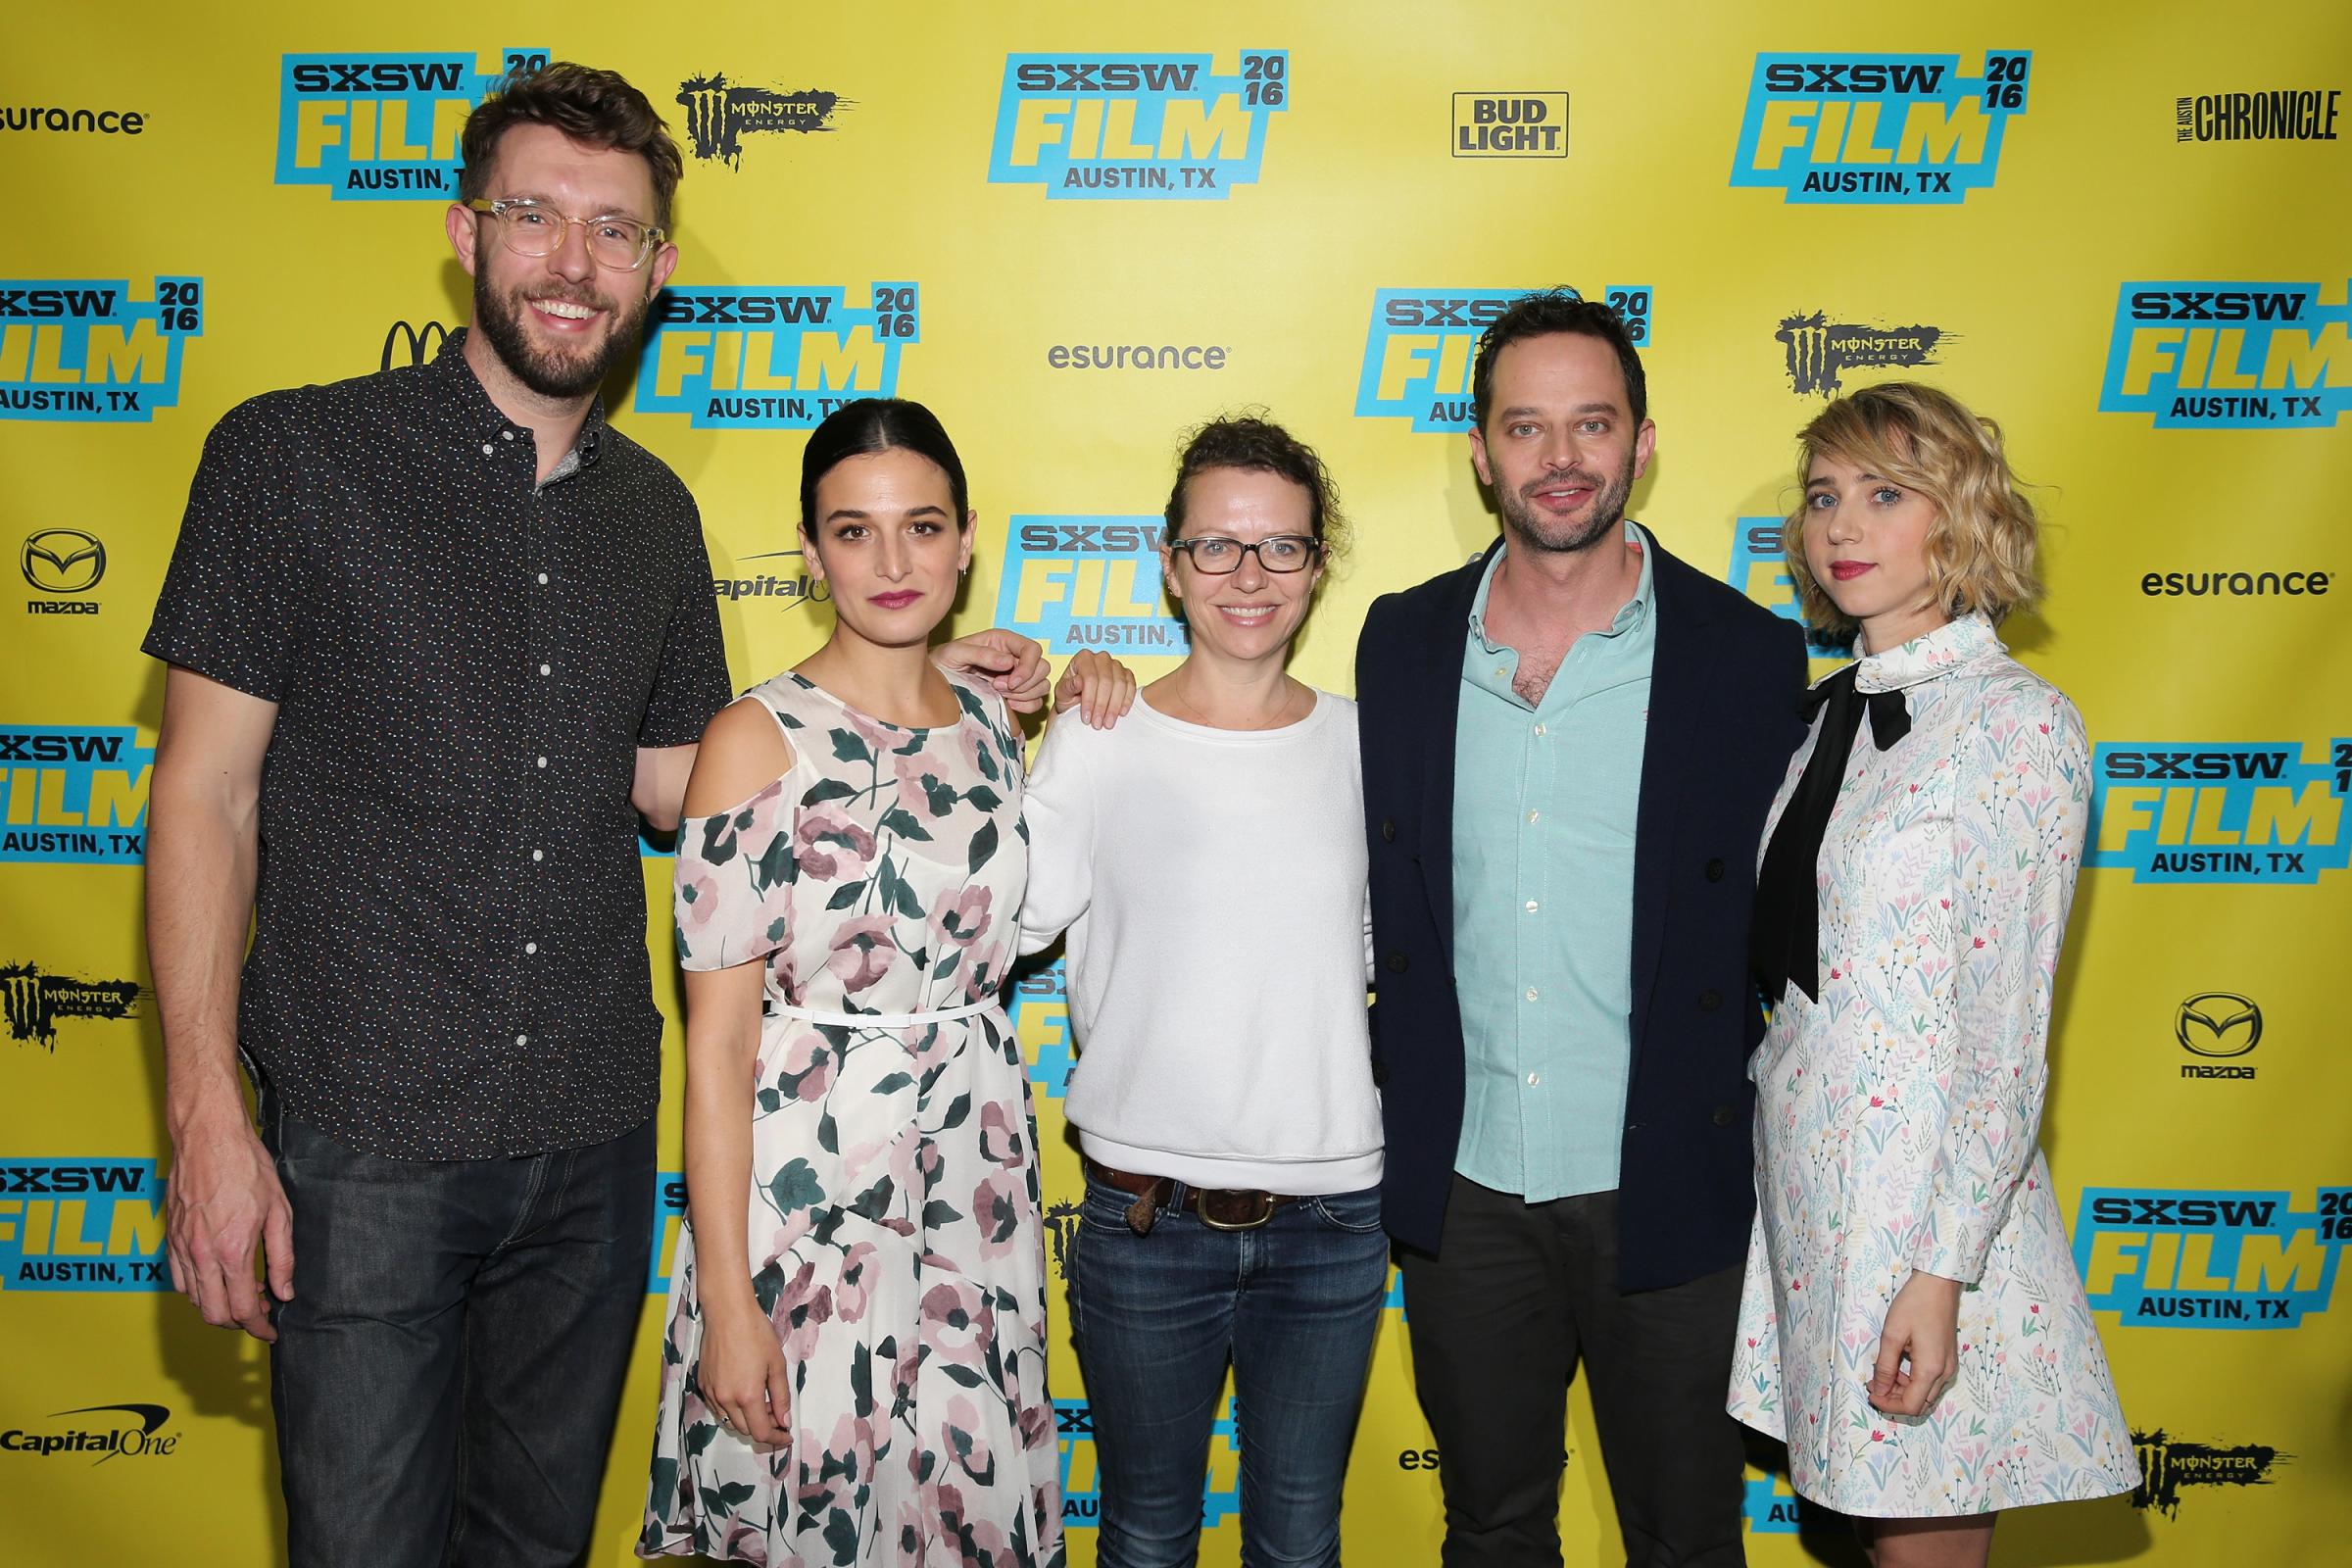 Charlie Hewson, Jenny Slate, Sophie Goodhart, Nick Kroll and Zoe Kazan attend the "My Blind Brother" premiere during the 2016 SXSW Festival on March 12, 2016 in Austin, Texas.